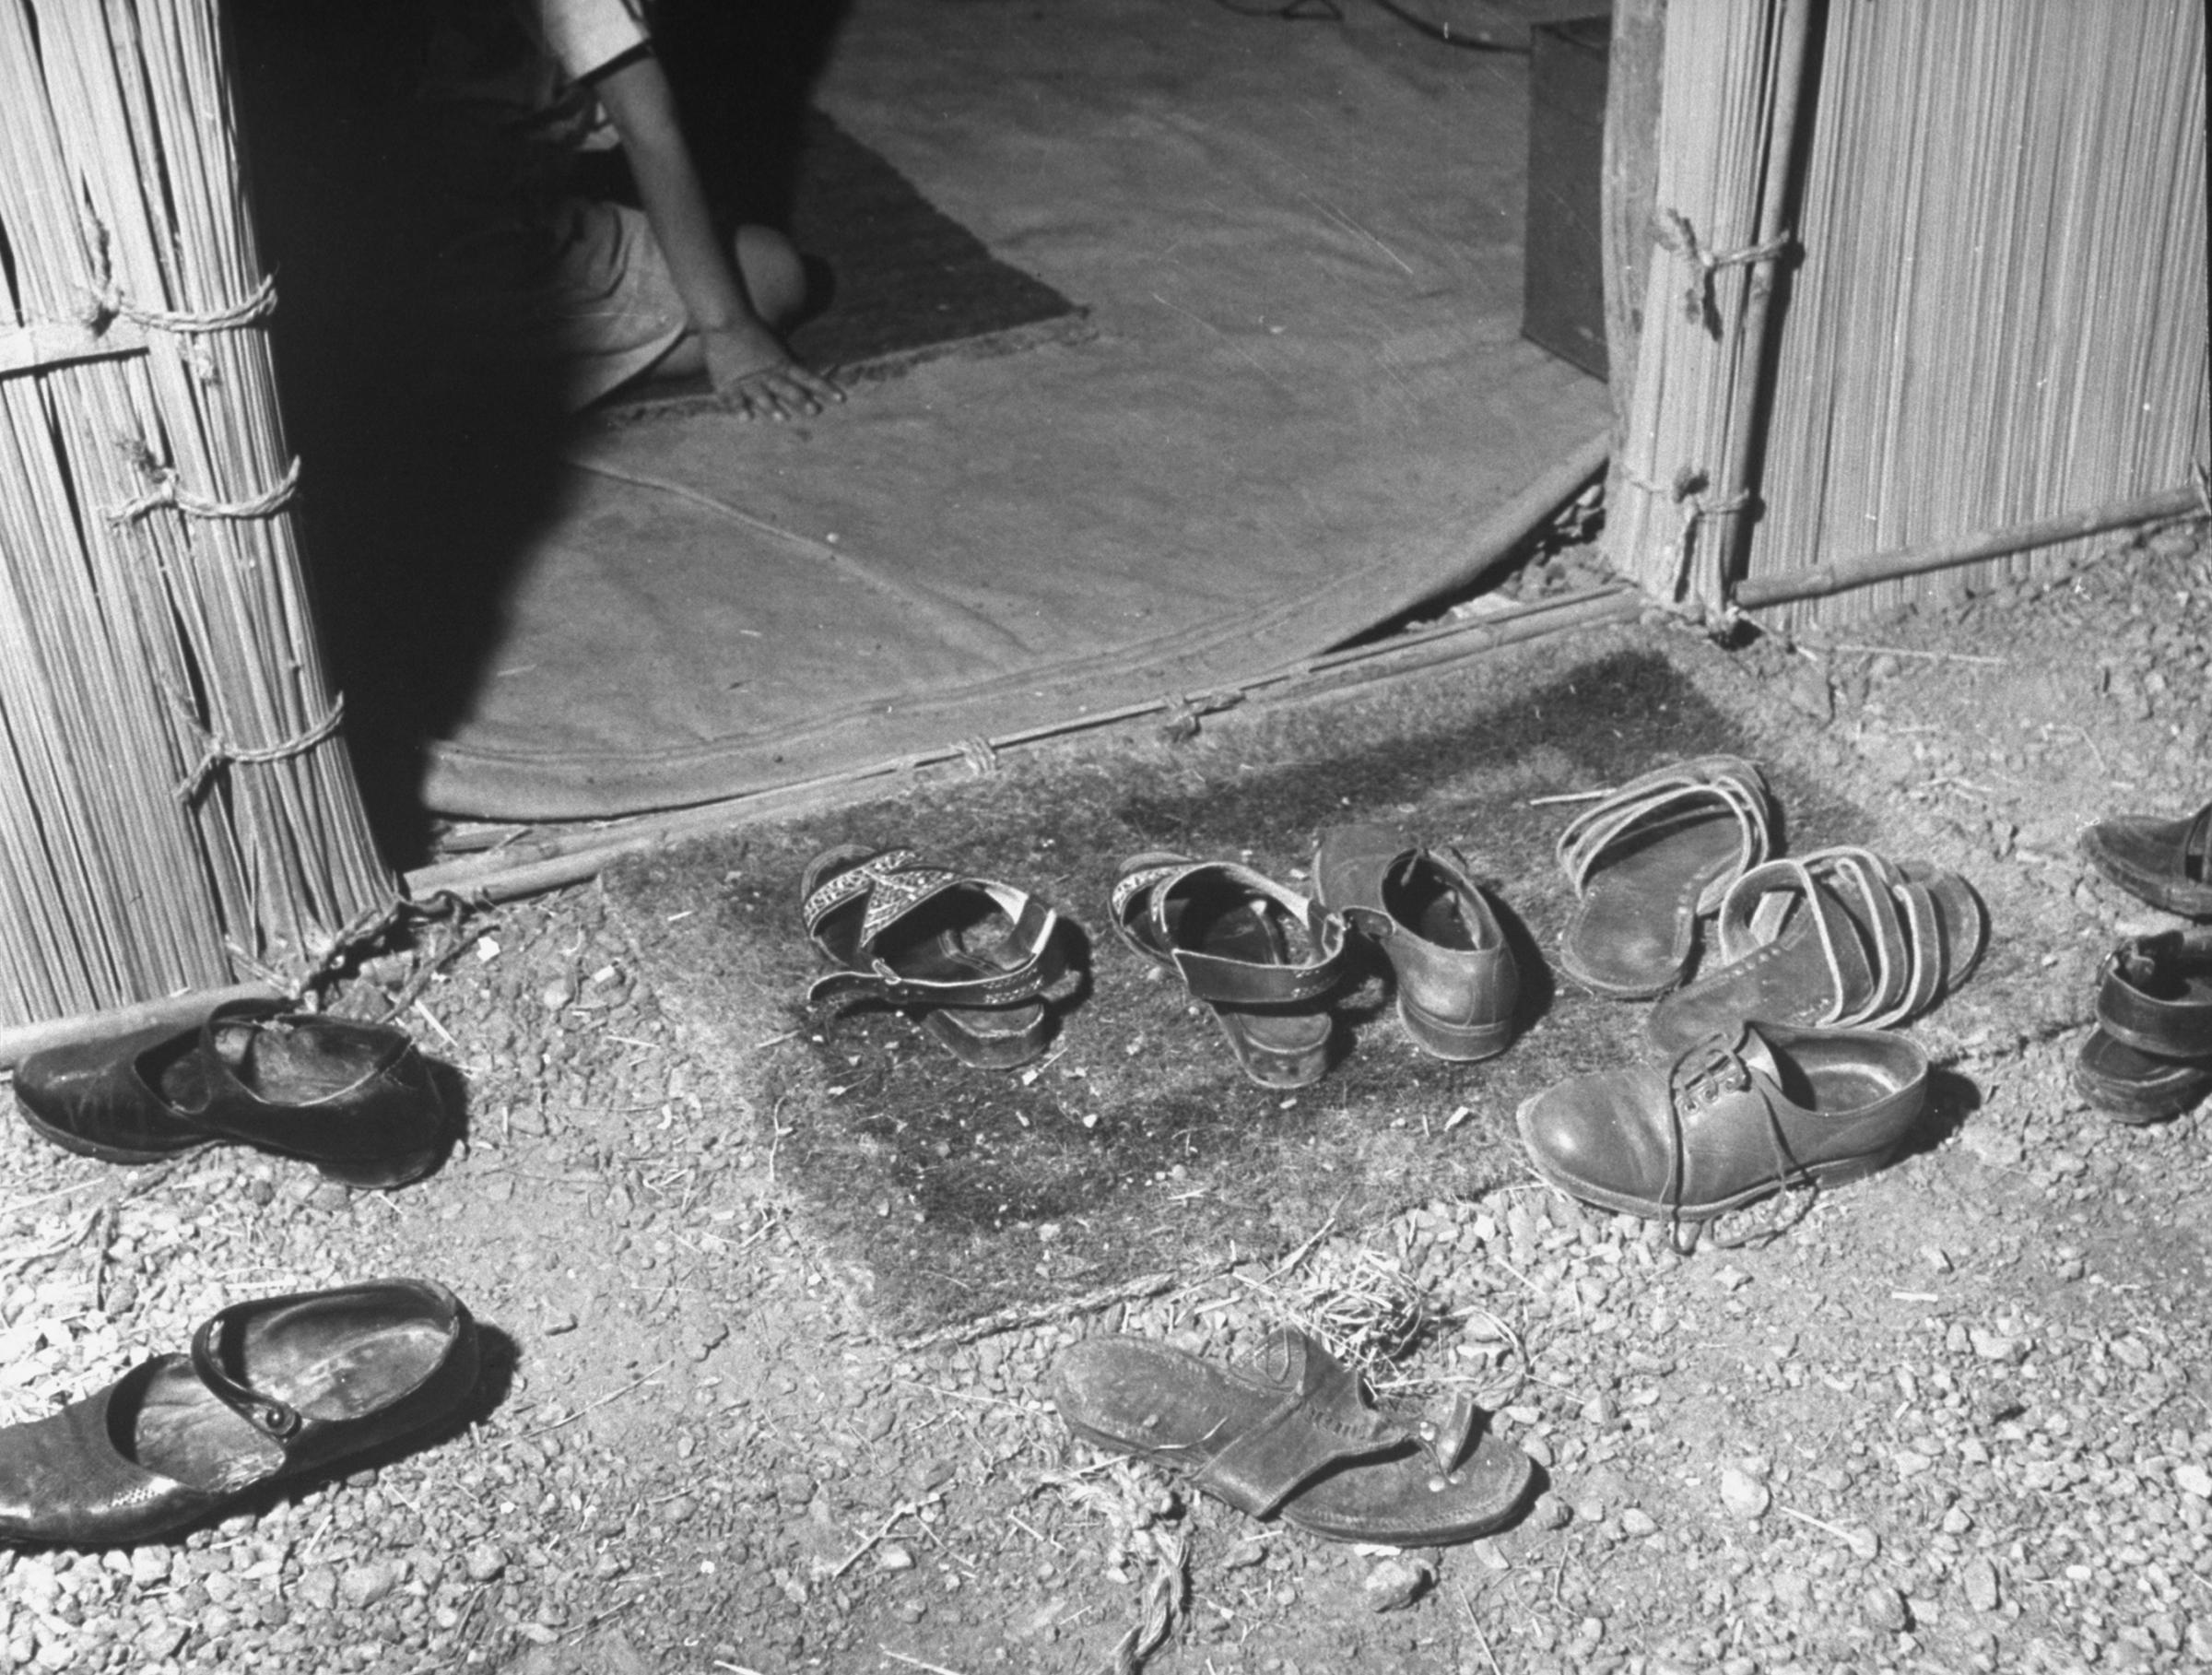 In 1946, an array of sandals and shoes lie outside the doorway of the flat occupied by Gandhi's personal secretary.